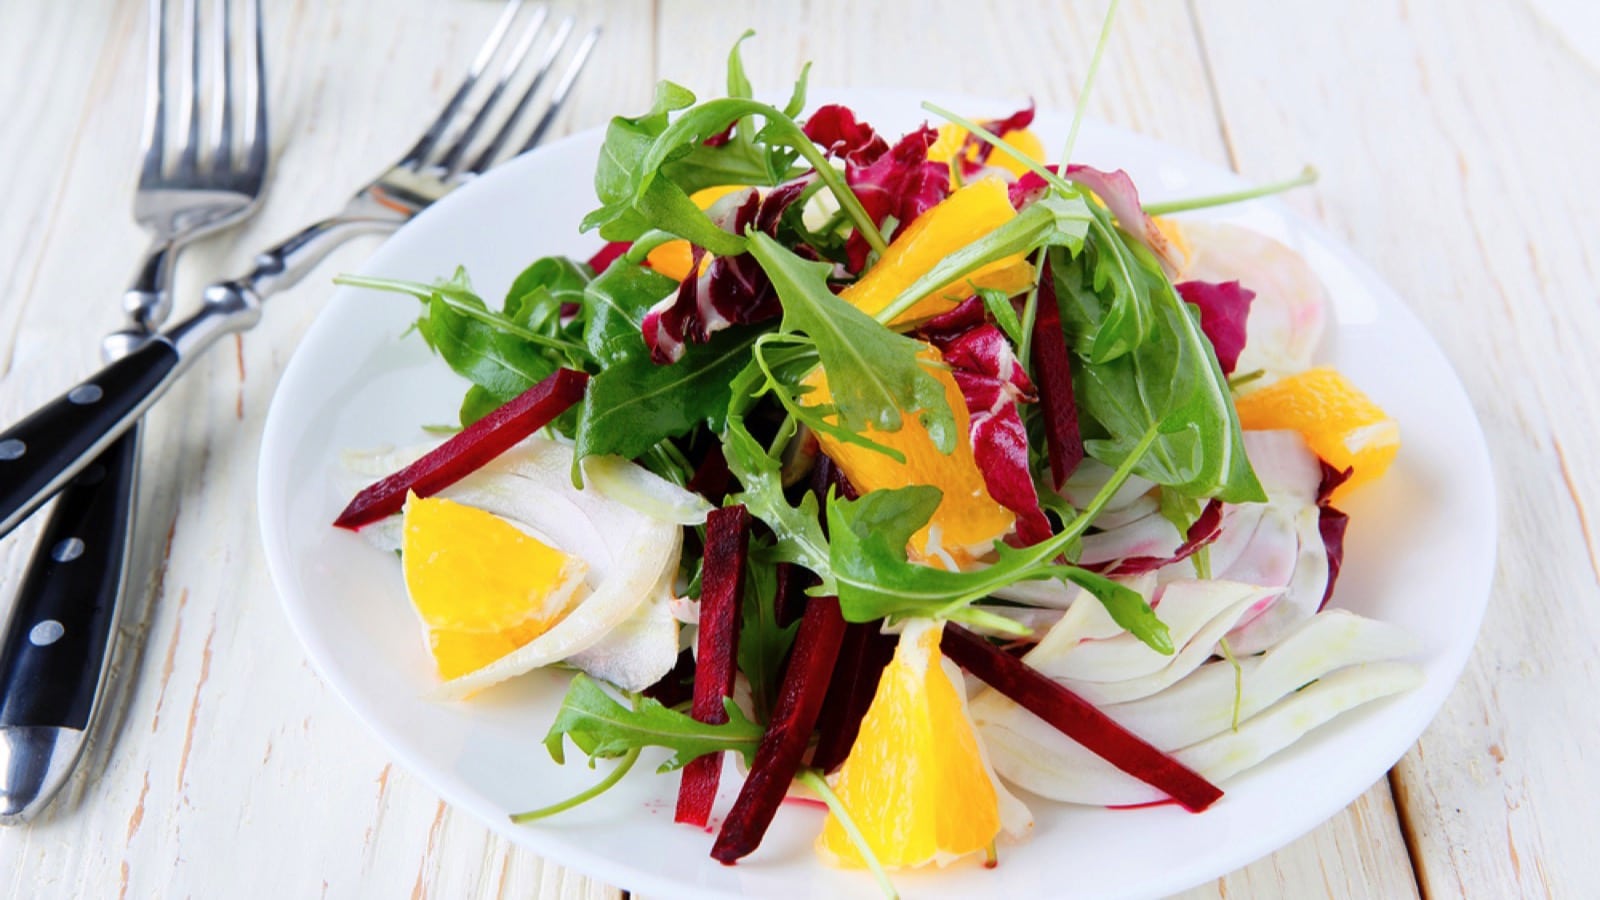 Beet salad with orange and fennel